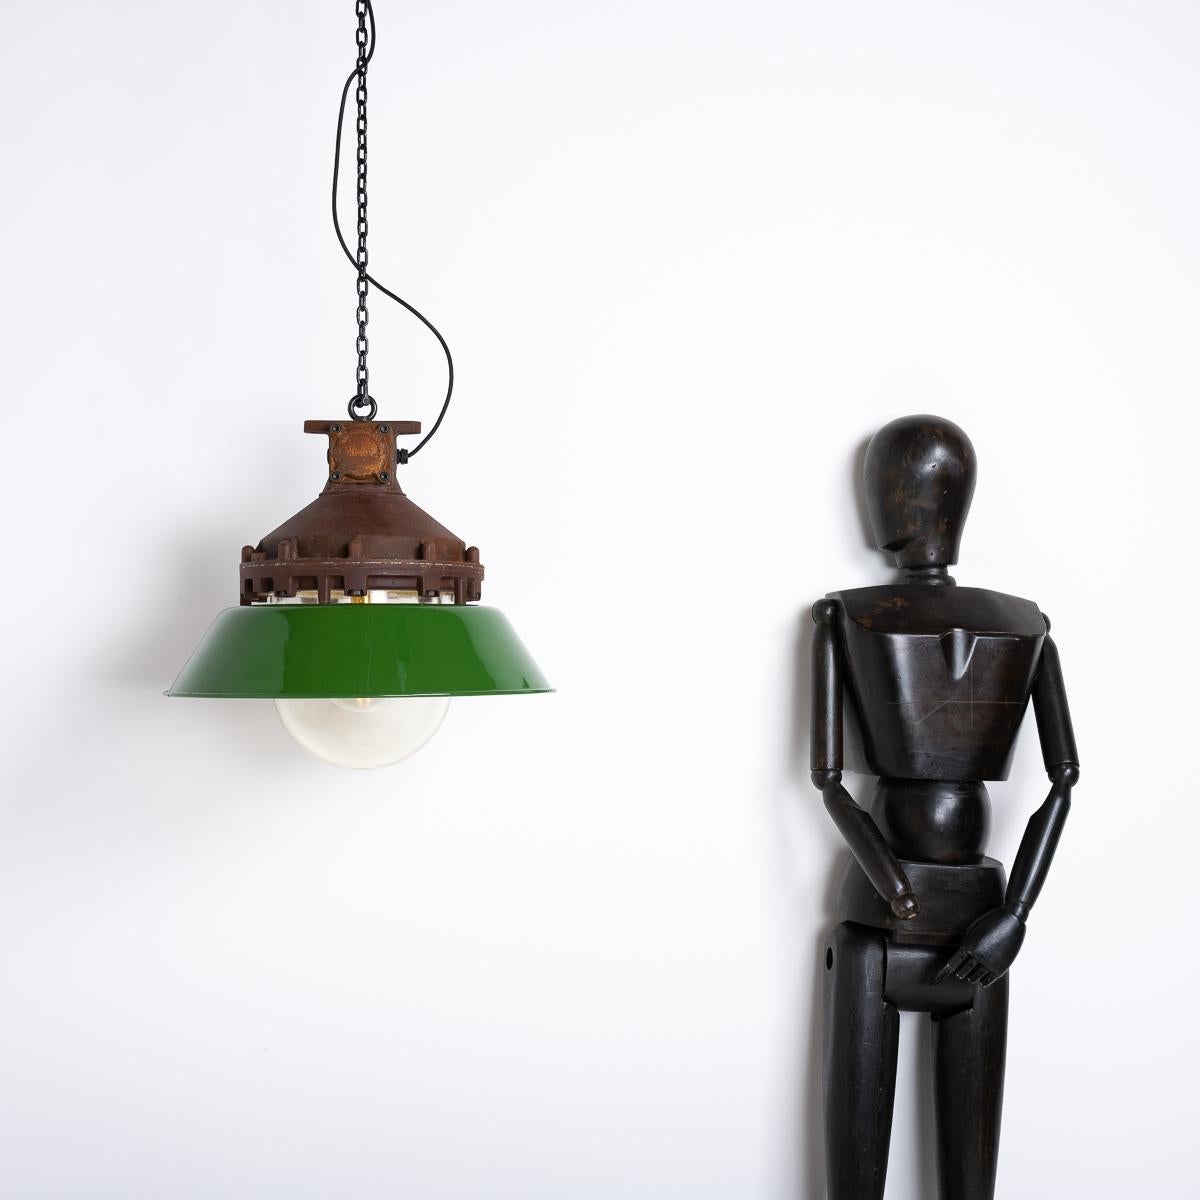 British Industrial Explosion Proof Rusted Pendant Lights With Green Enamel Diffusers  For Sale